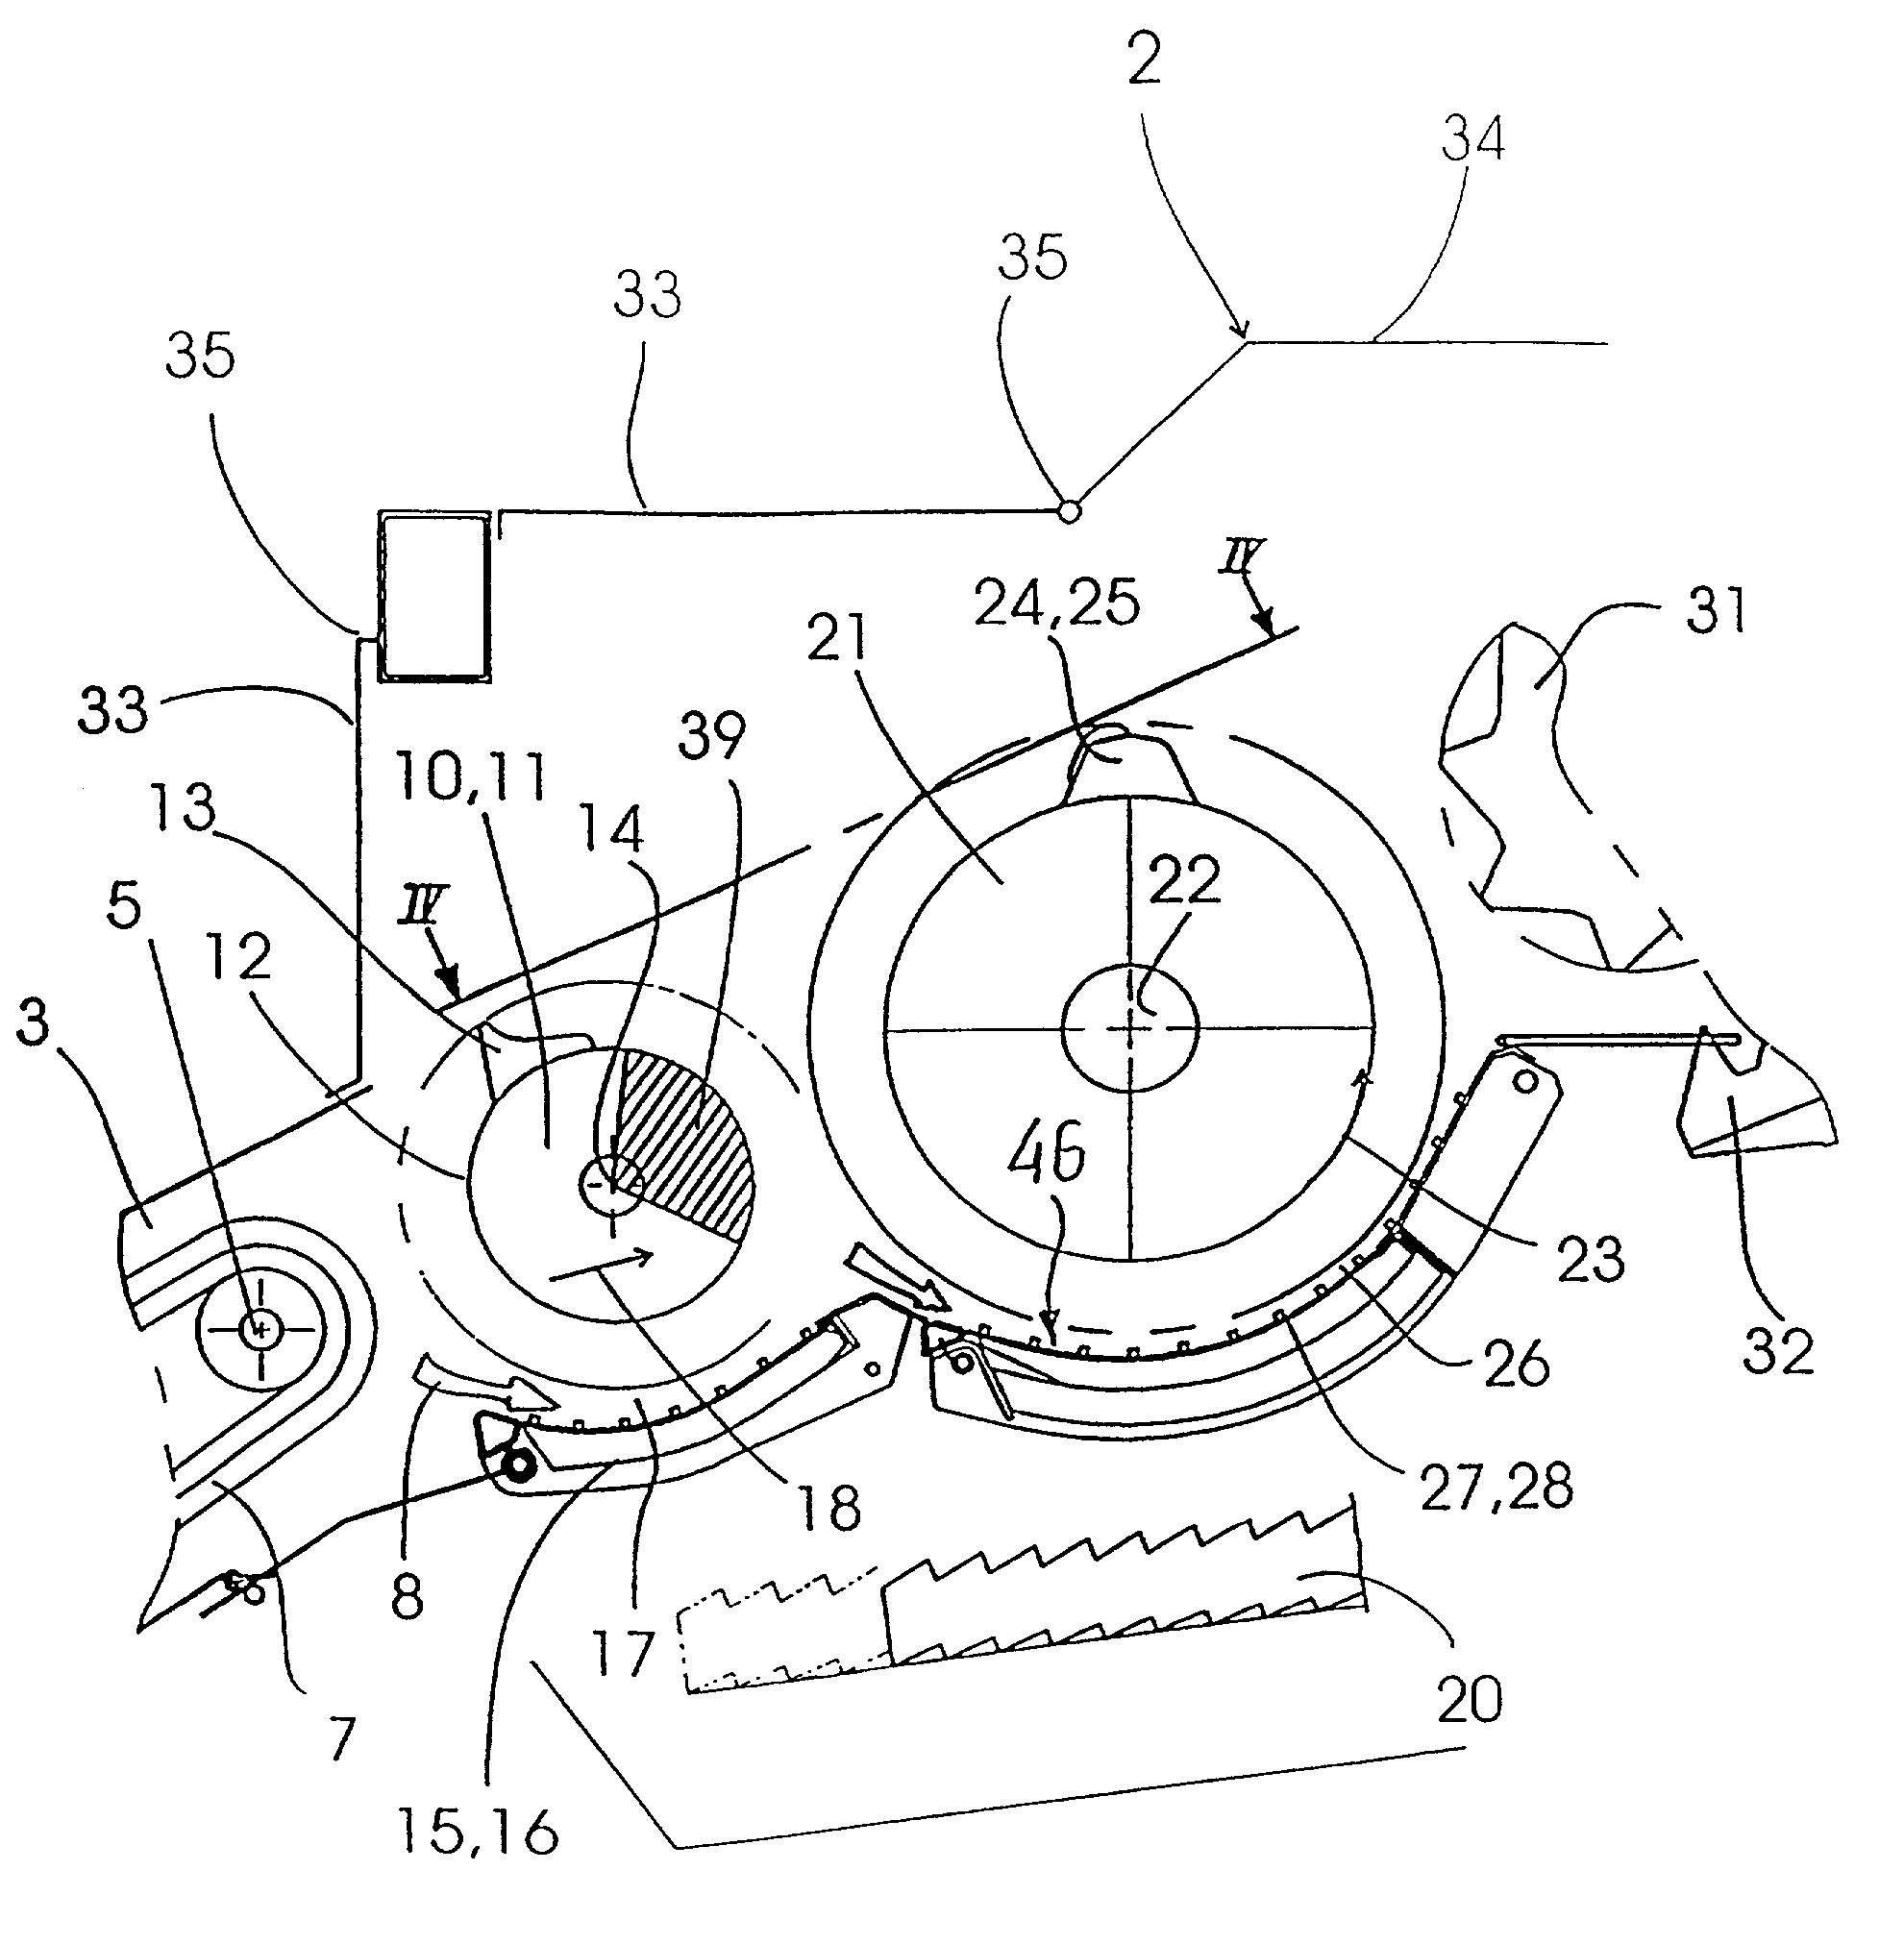 Releasable segment in the working members of an agricultural harvesting machine